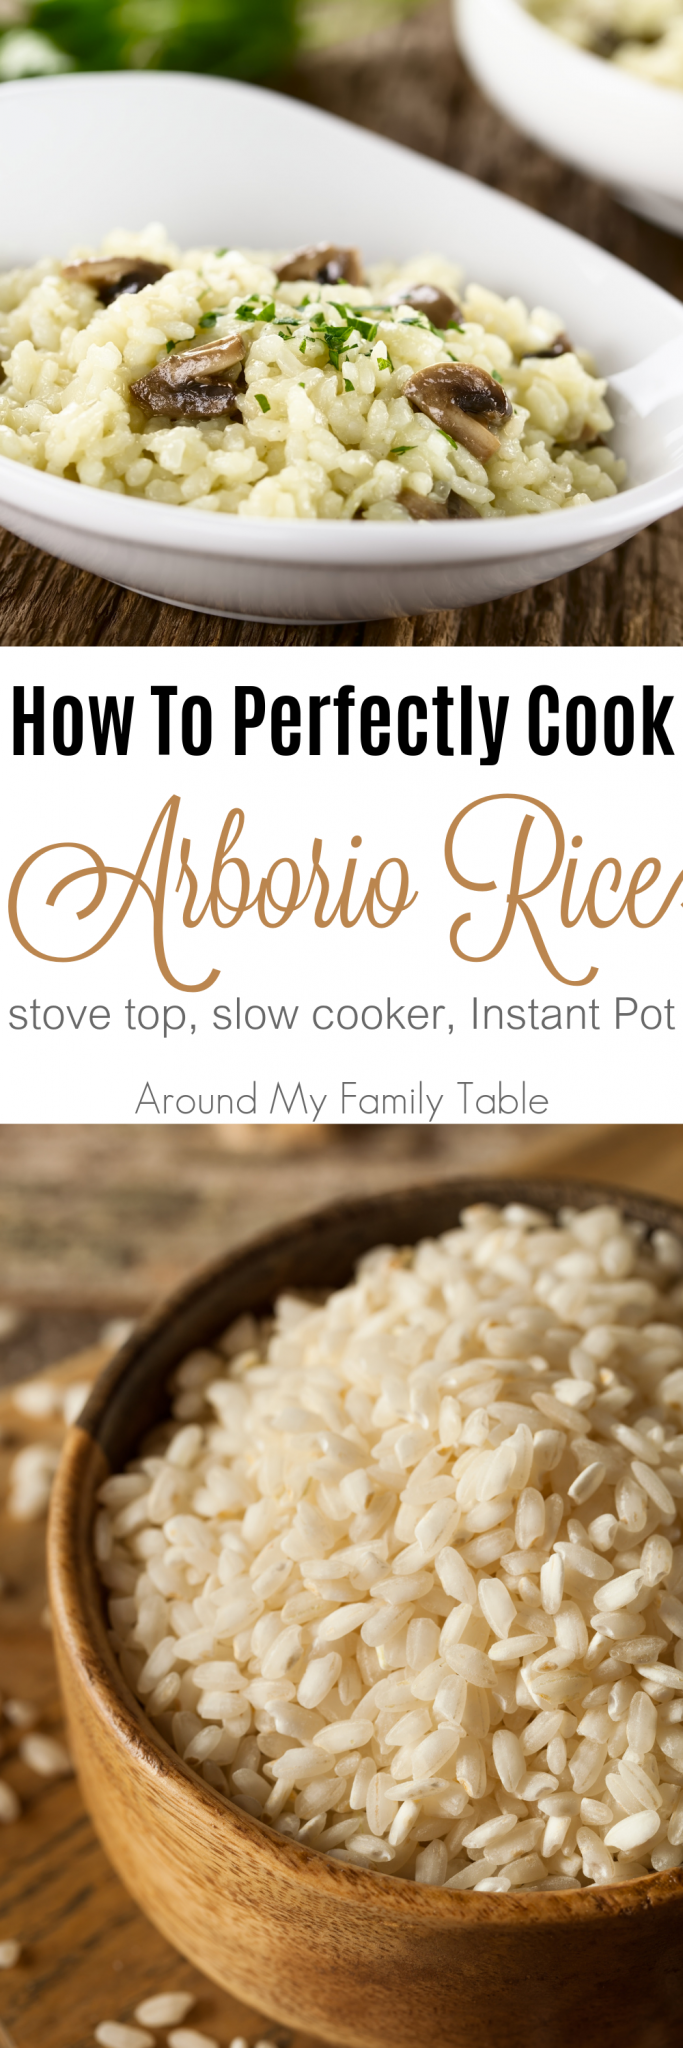 collage of dried and cooked arborio rice